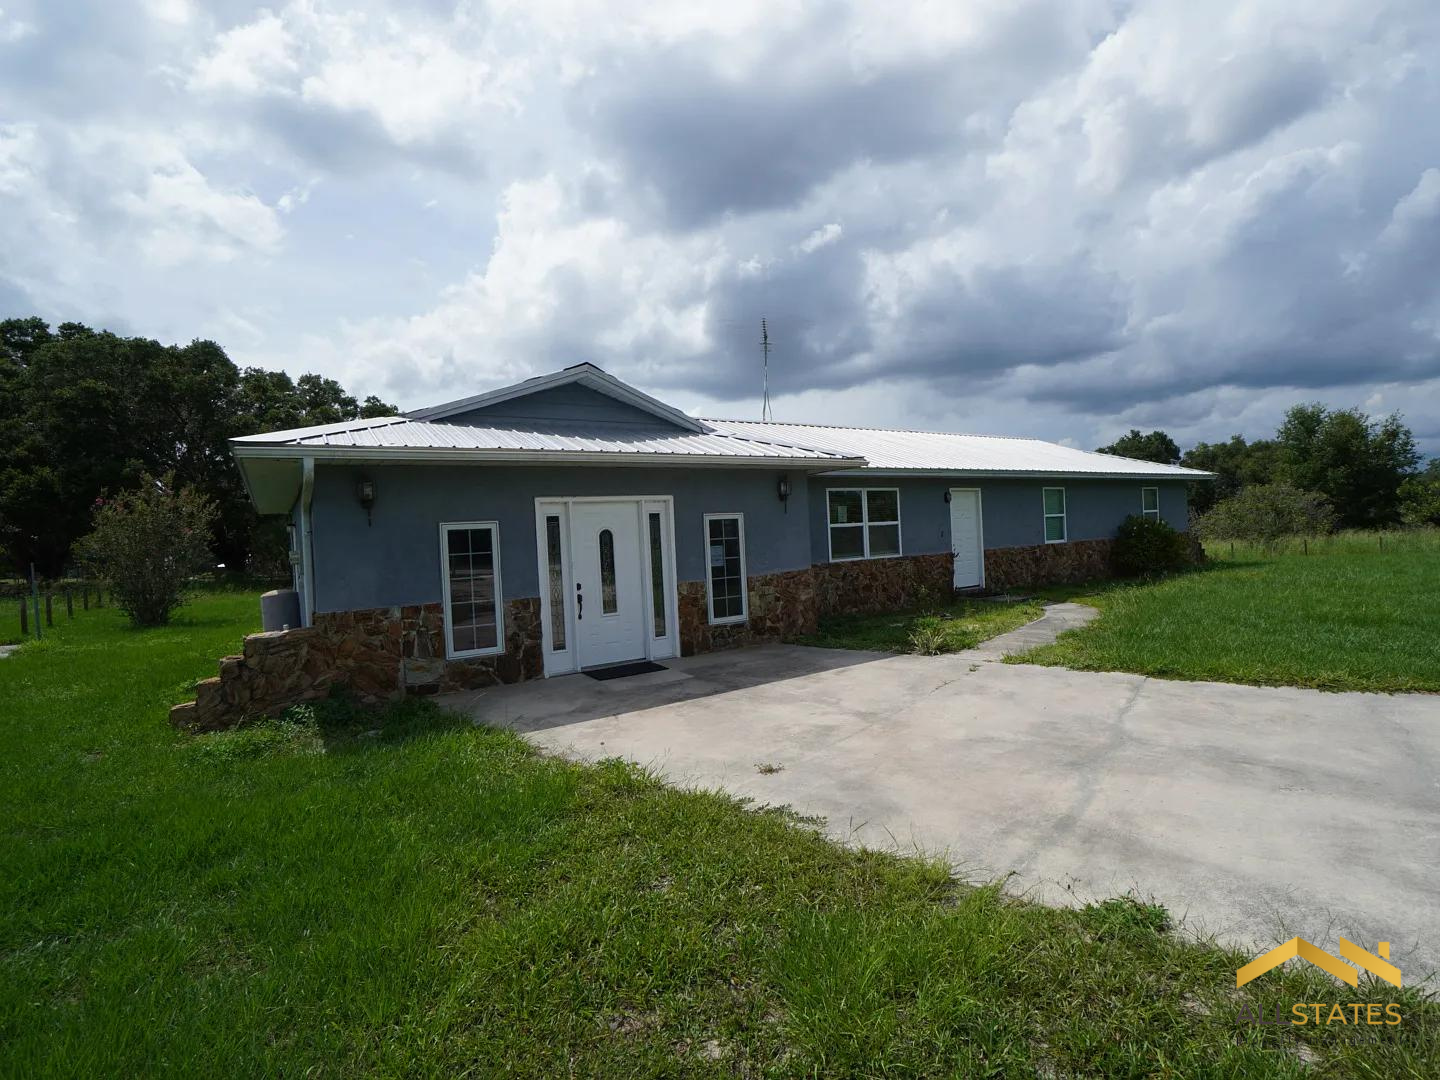 Photo of property: 15330 S Highway 25 Weirsdale, FL 32195